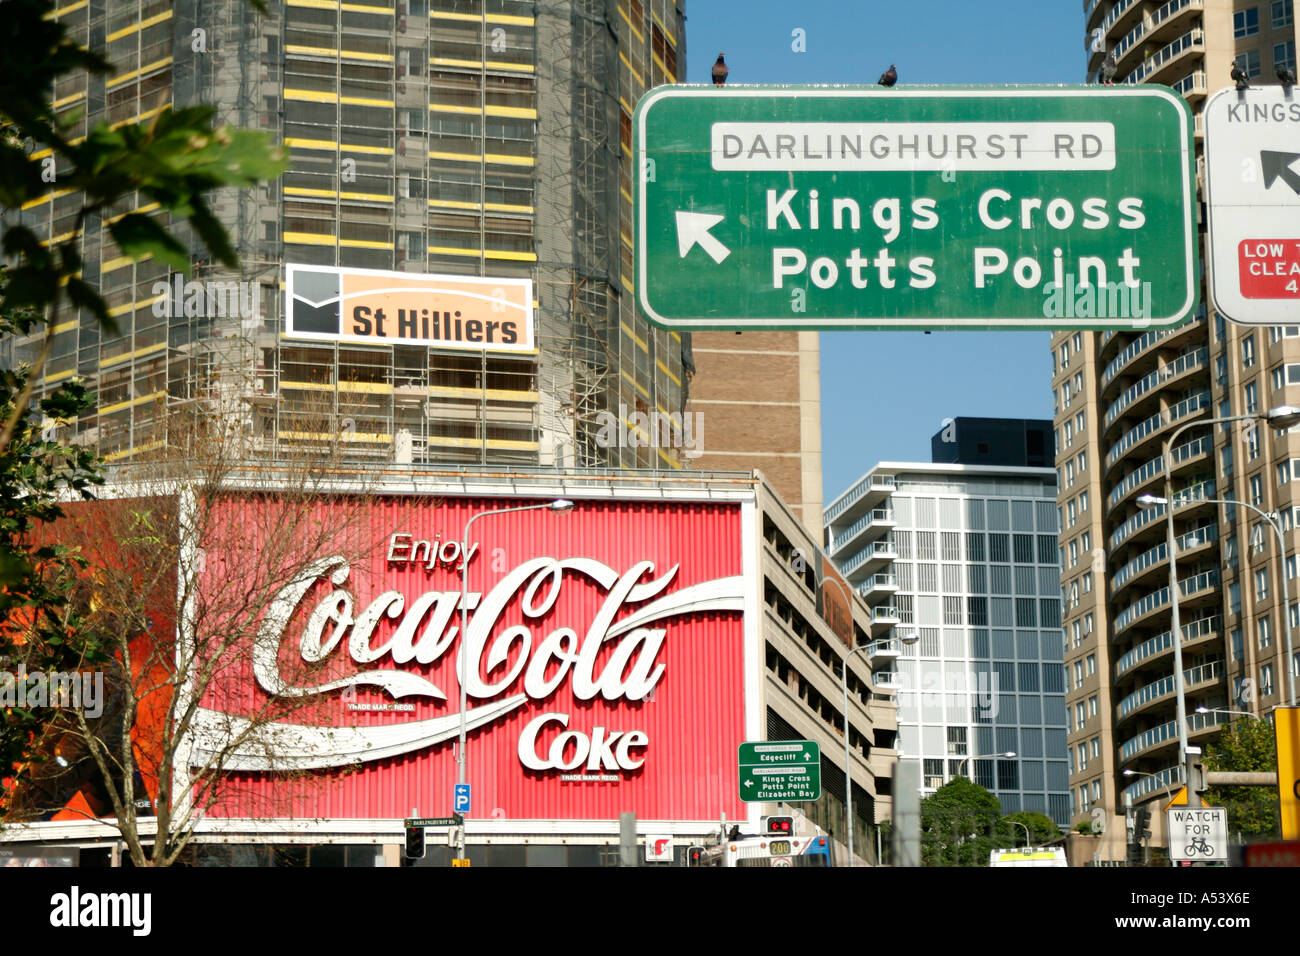 Famous coca cola sign by Darlinghurst Road in the Kings Cross area of Sydney Australia Stock Photo